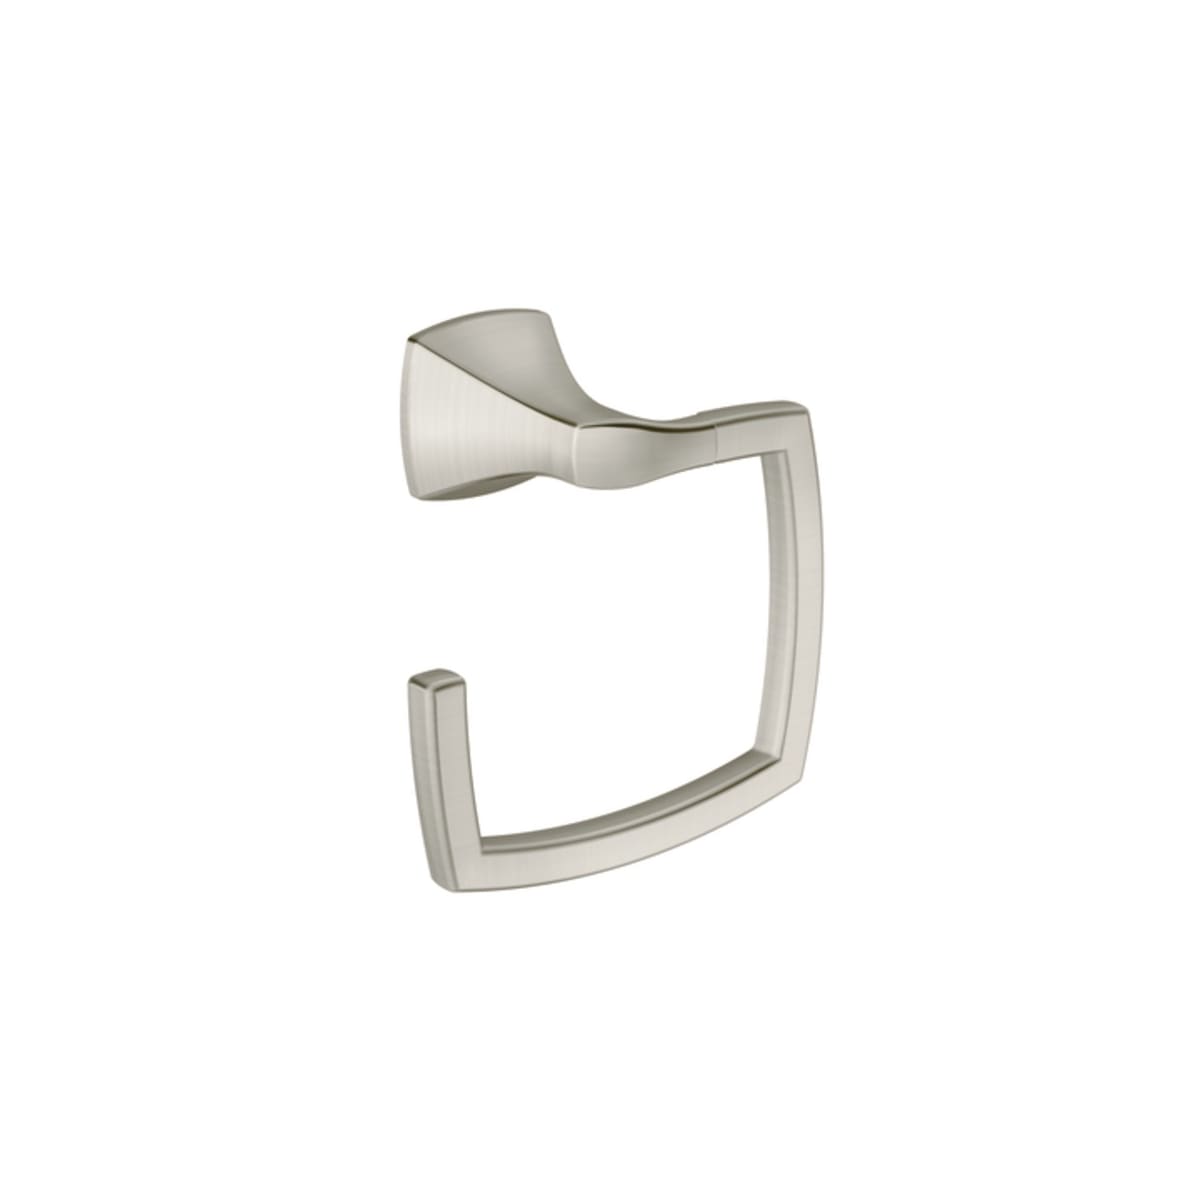 Details about   Voss Towel Ring in Brushed Nickel by MOEN 